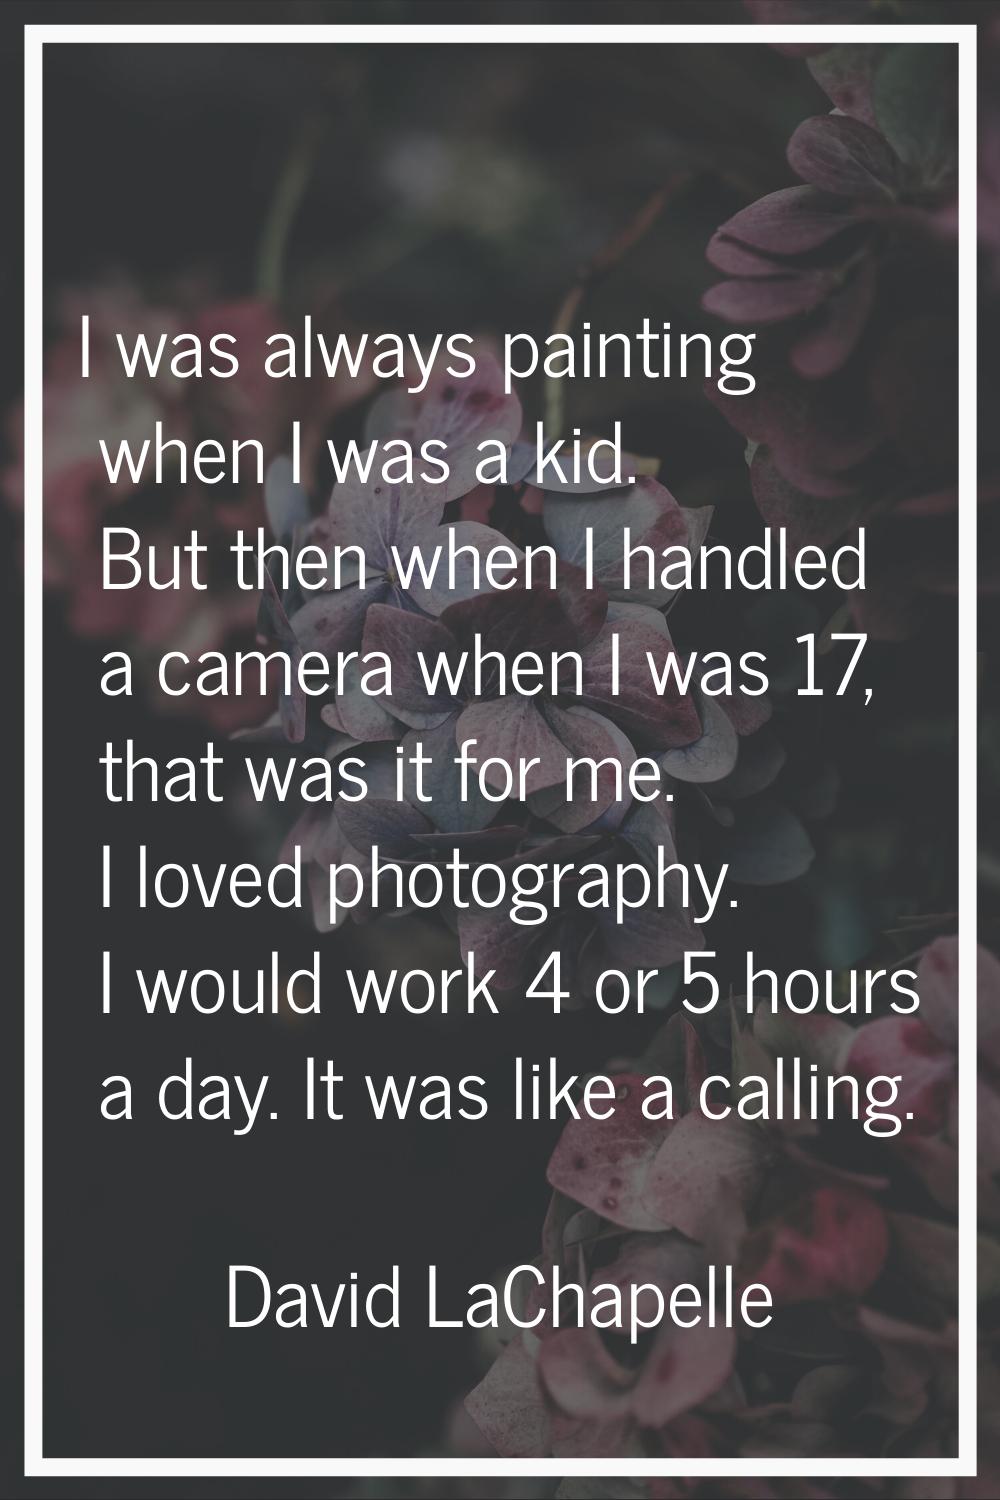 I was always painting when I was a kid. But then when I handled a camera when I was 17, that was it